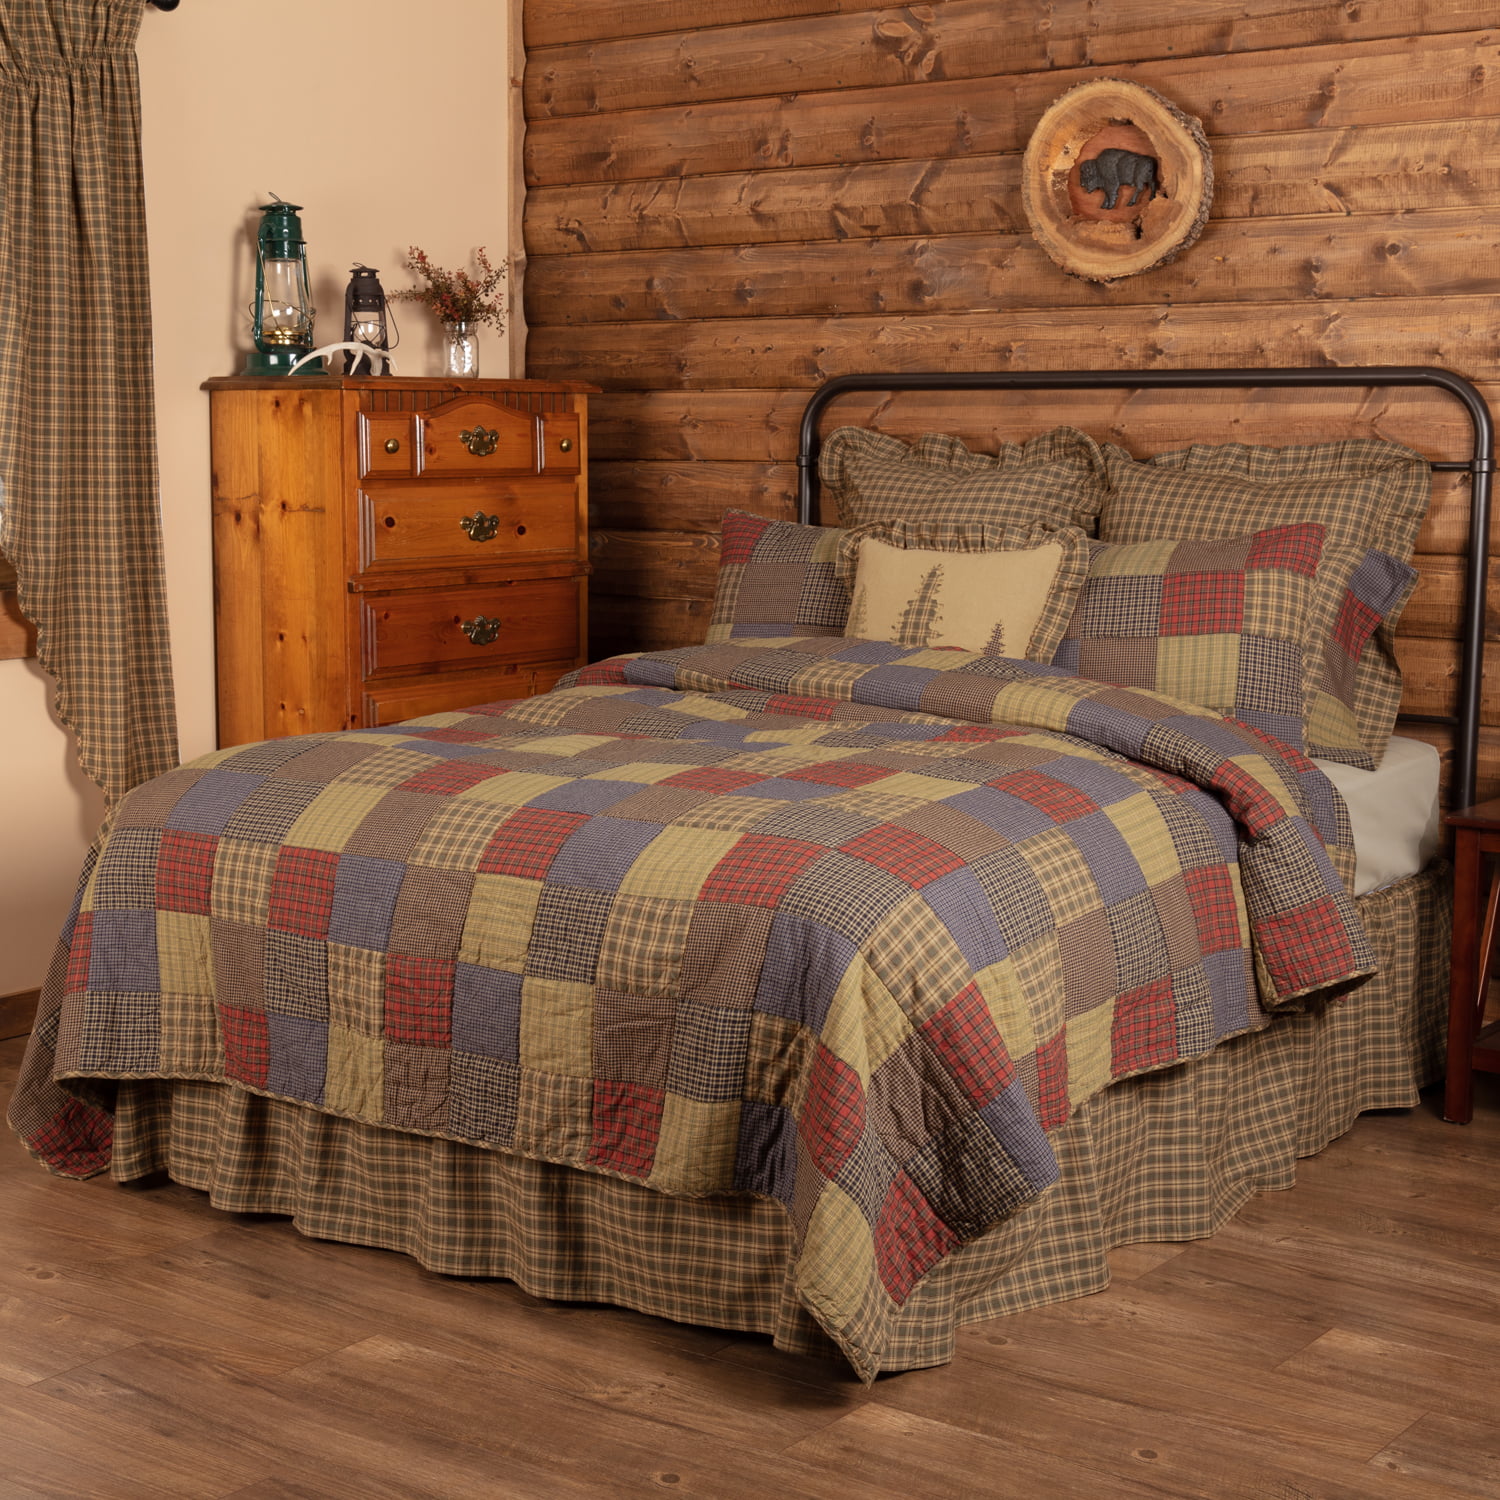 VHC Rustic King Quilt Bedding Patchwork Pre-Washed Seneca Brown Chambray Cotton